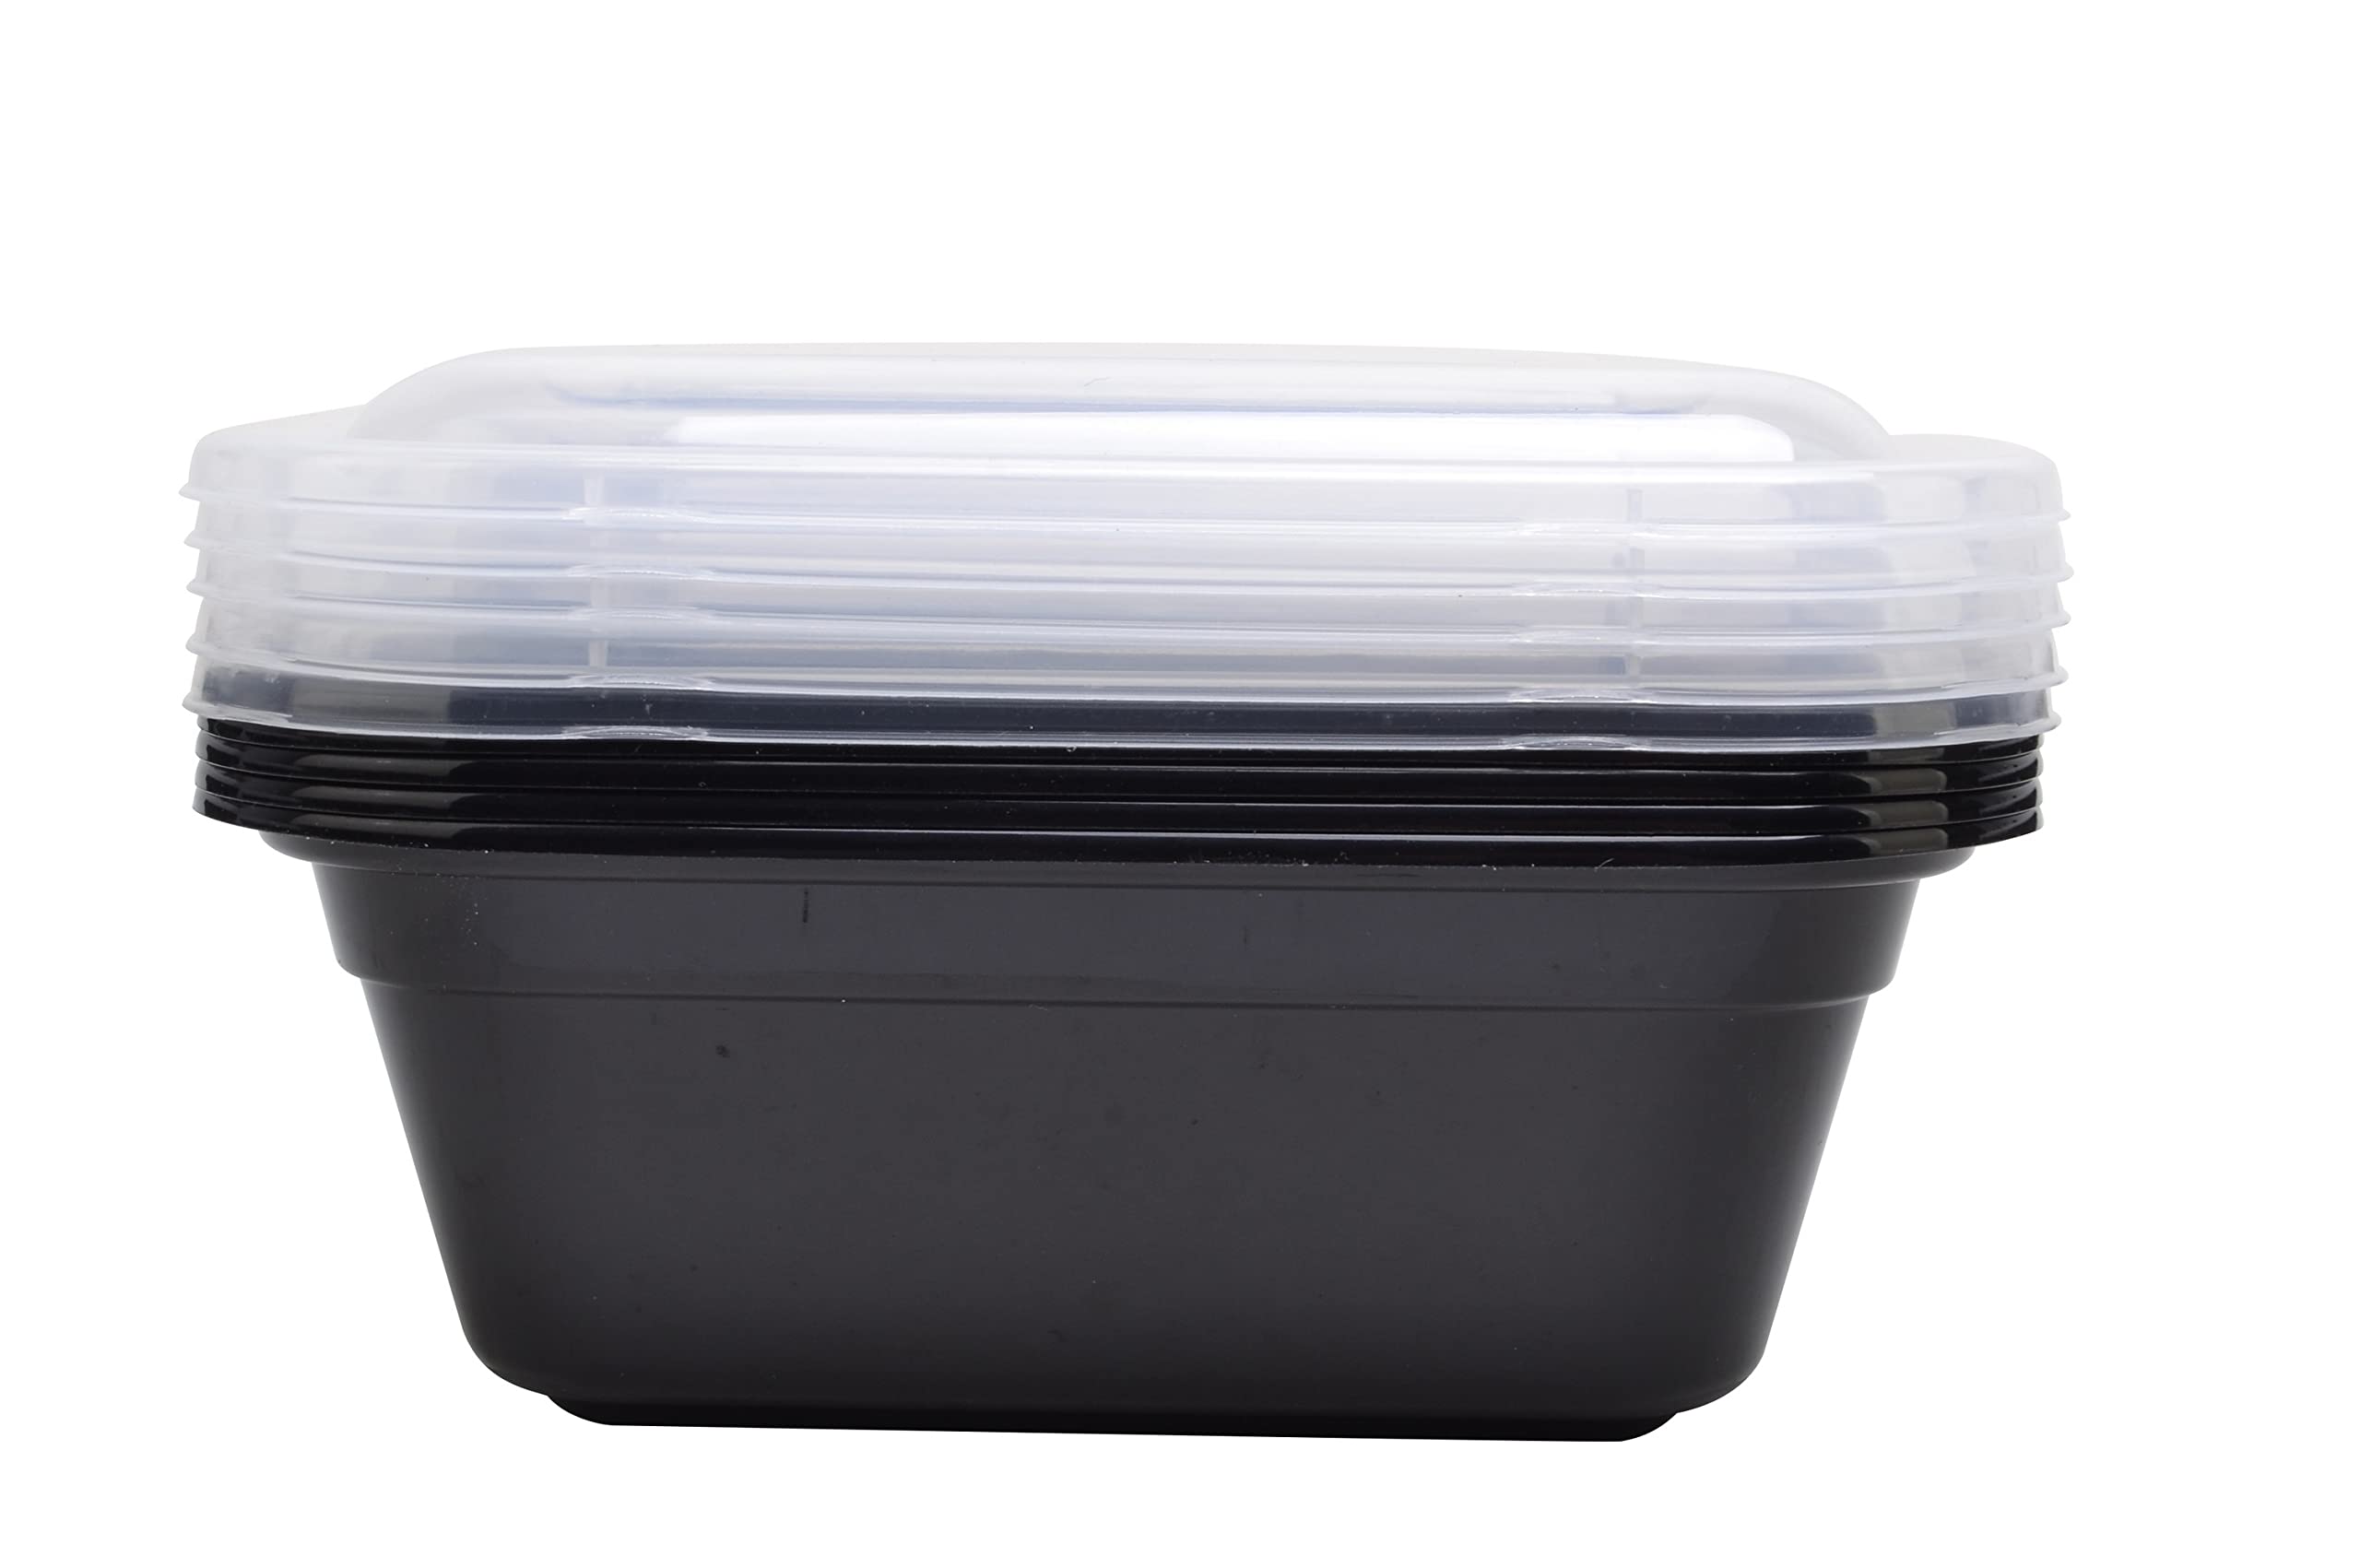 Deahun Mainstays 5 Pk 4.2 Cups Rectangular Plastic Meal Prep, Clear Lids and Black Containers